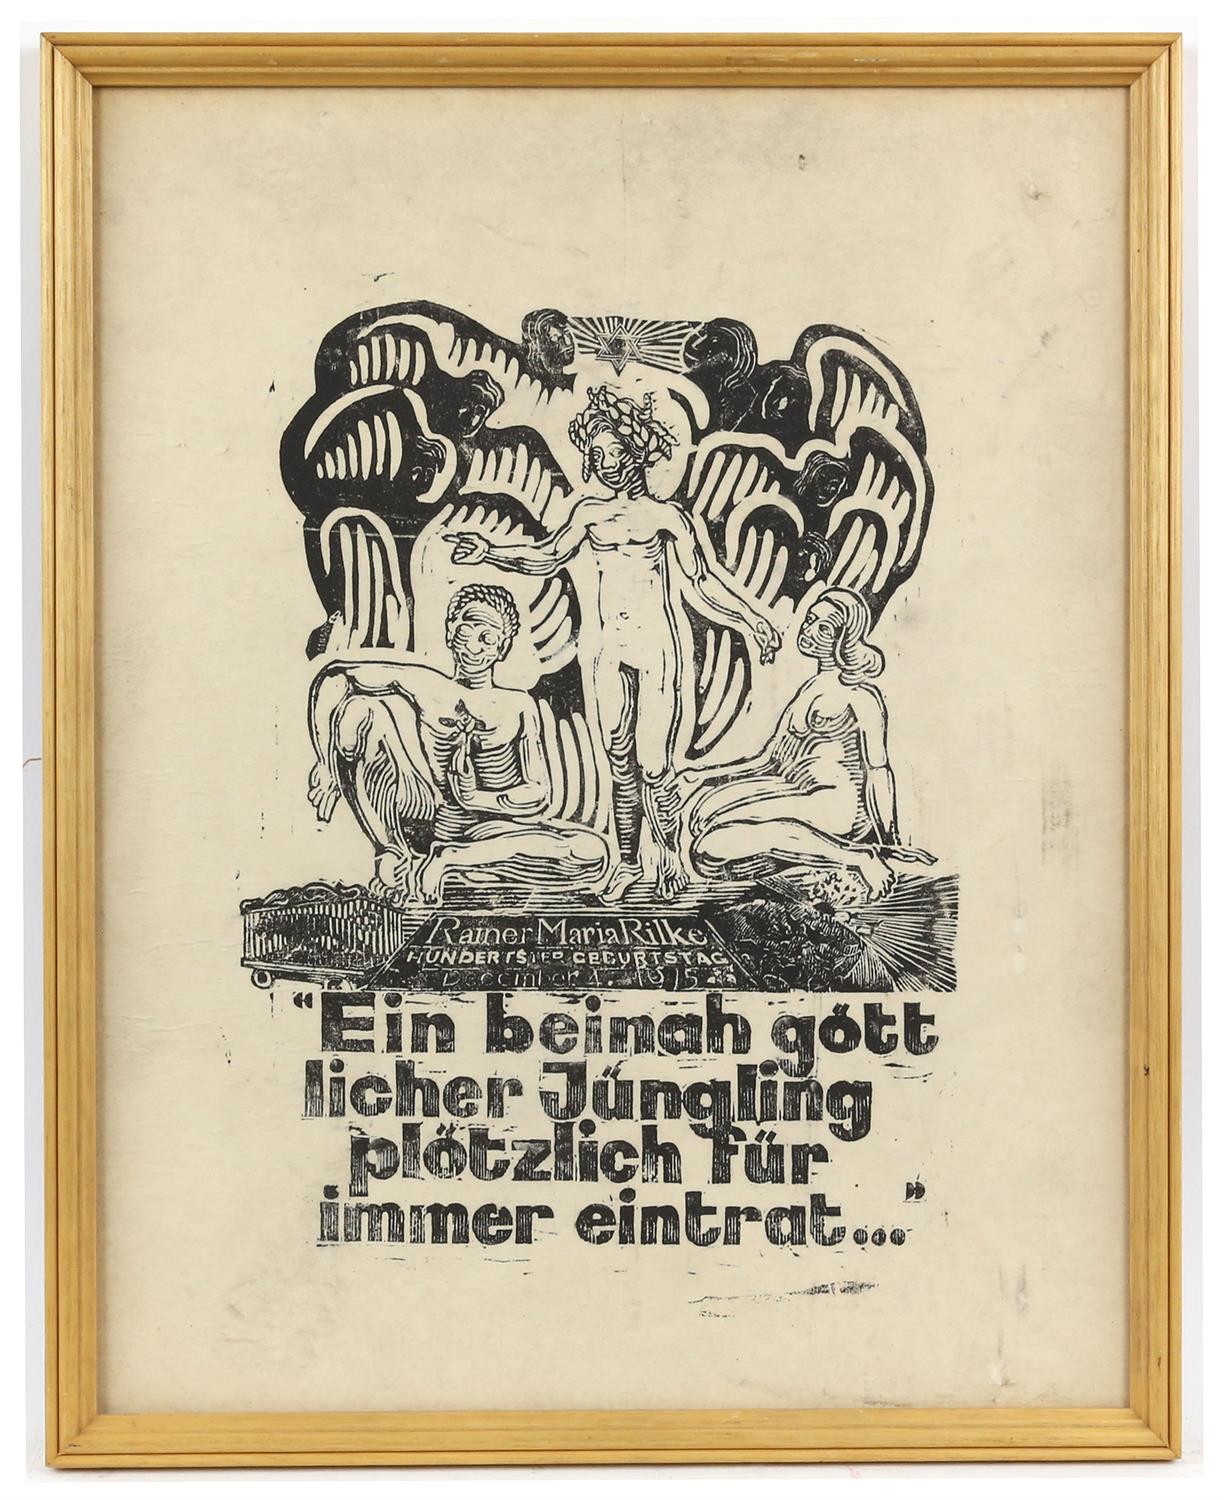 German Modernist. Woodcut illustration, marking the 100th anniversary of the poet Rainer Maria